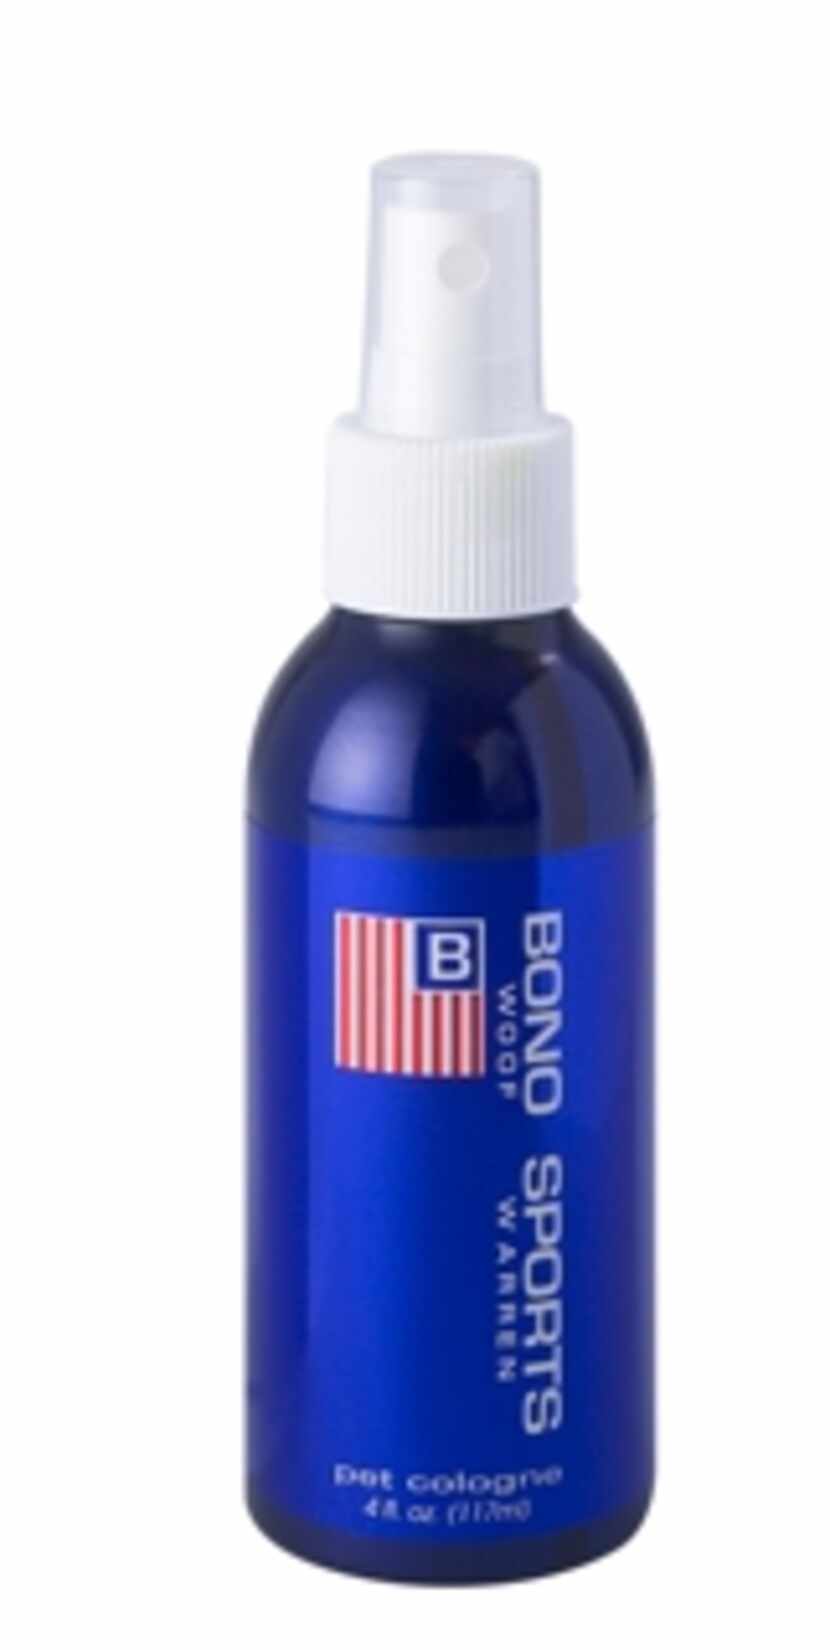 
The well-groomed dog needs to smell good, too. Urban Dogg carries a variety of spray...